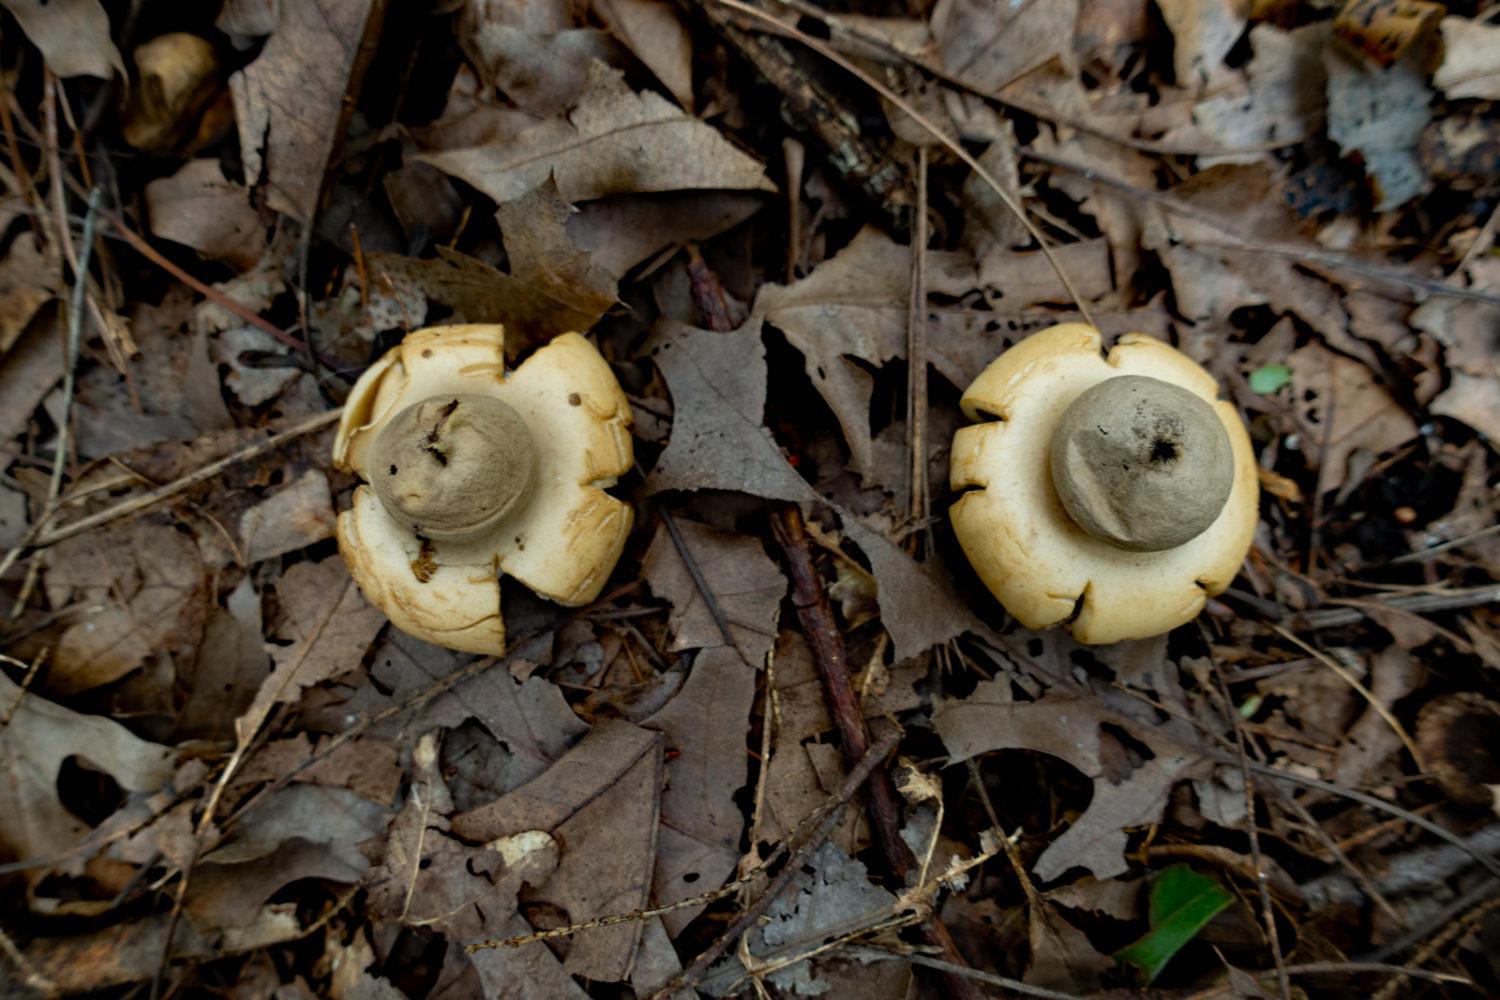 Rounded Earthstar mushrooms in our backyard